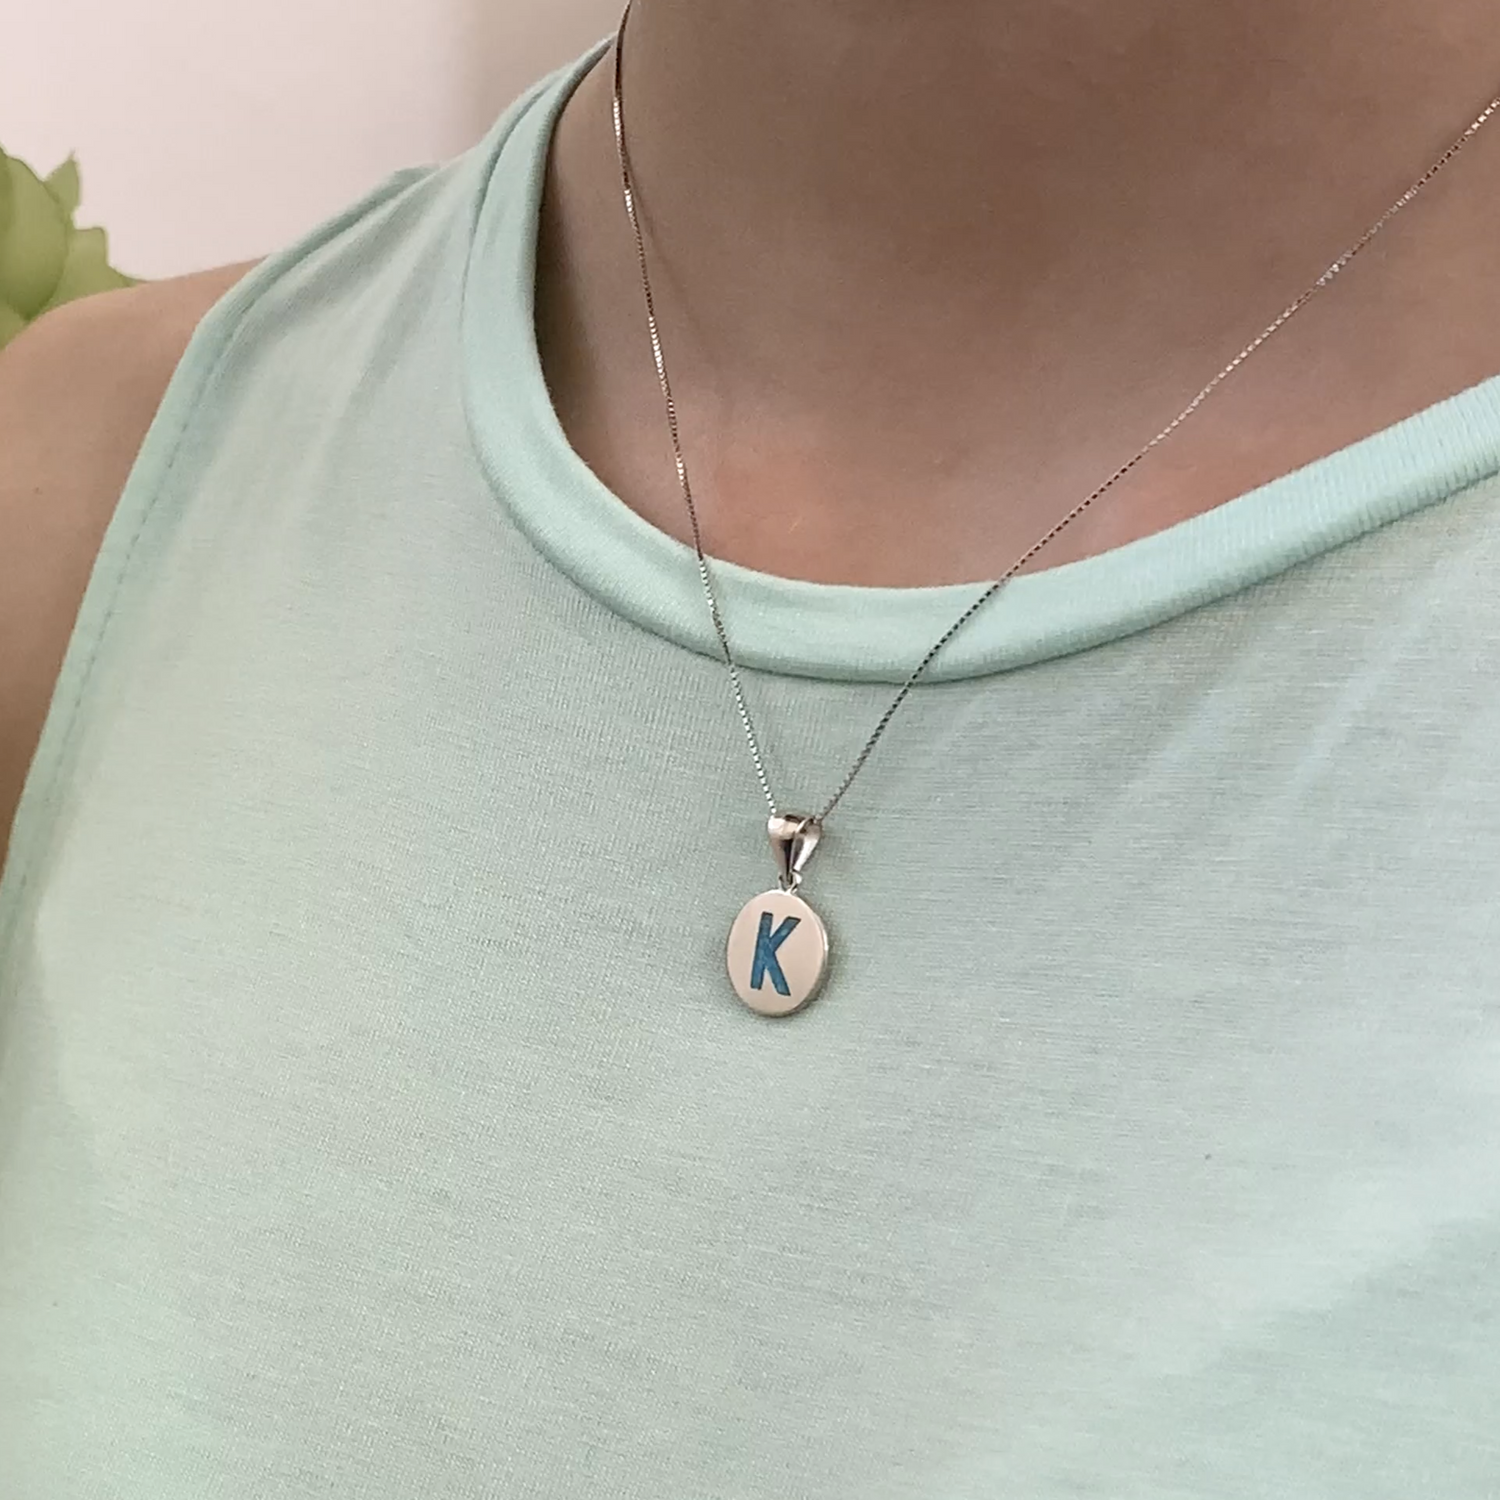 Opalite charm shown on model as a necklace.